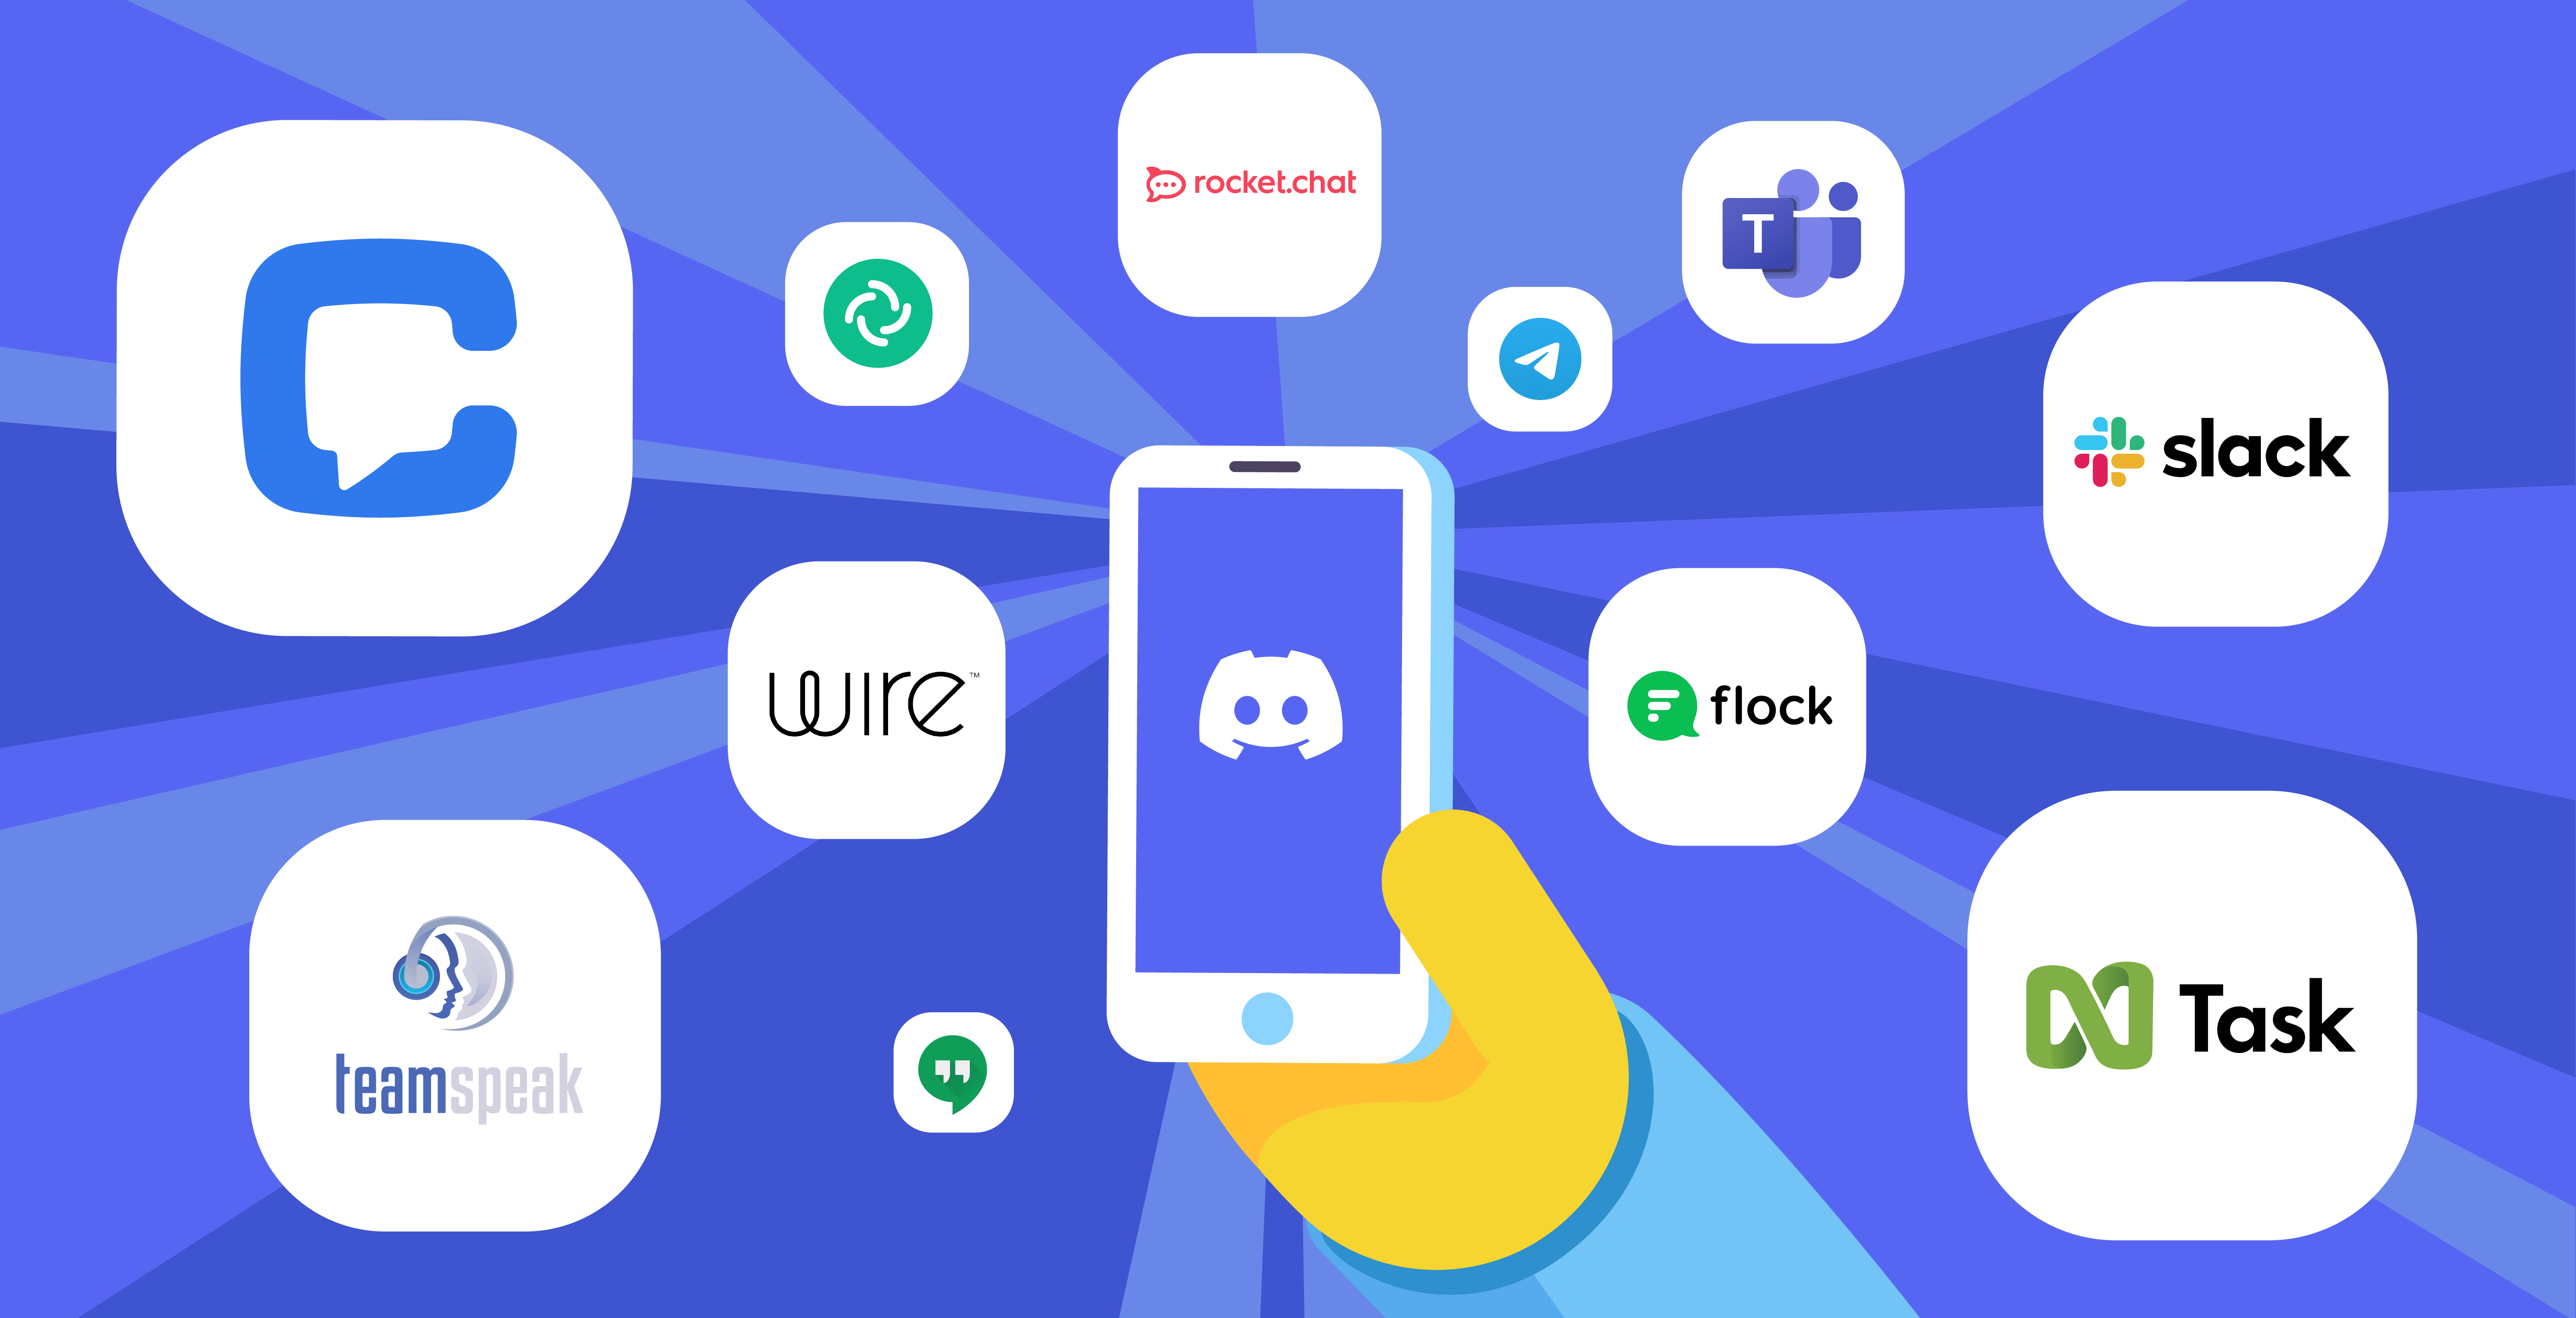 Discord privacy: the ultimate guide to stay safe in Discord